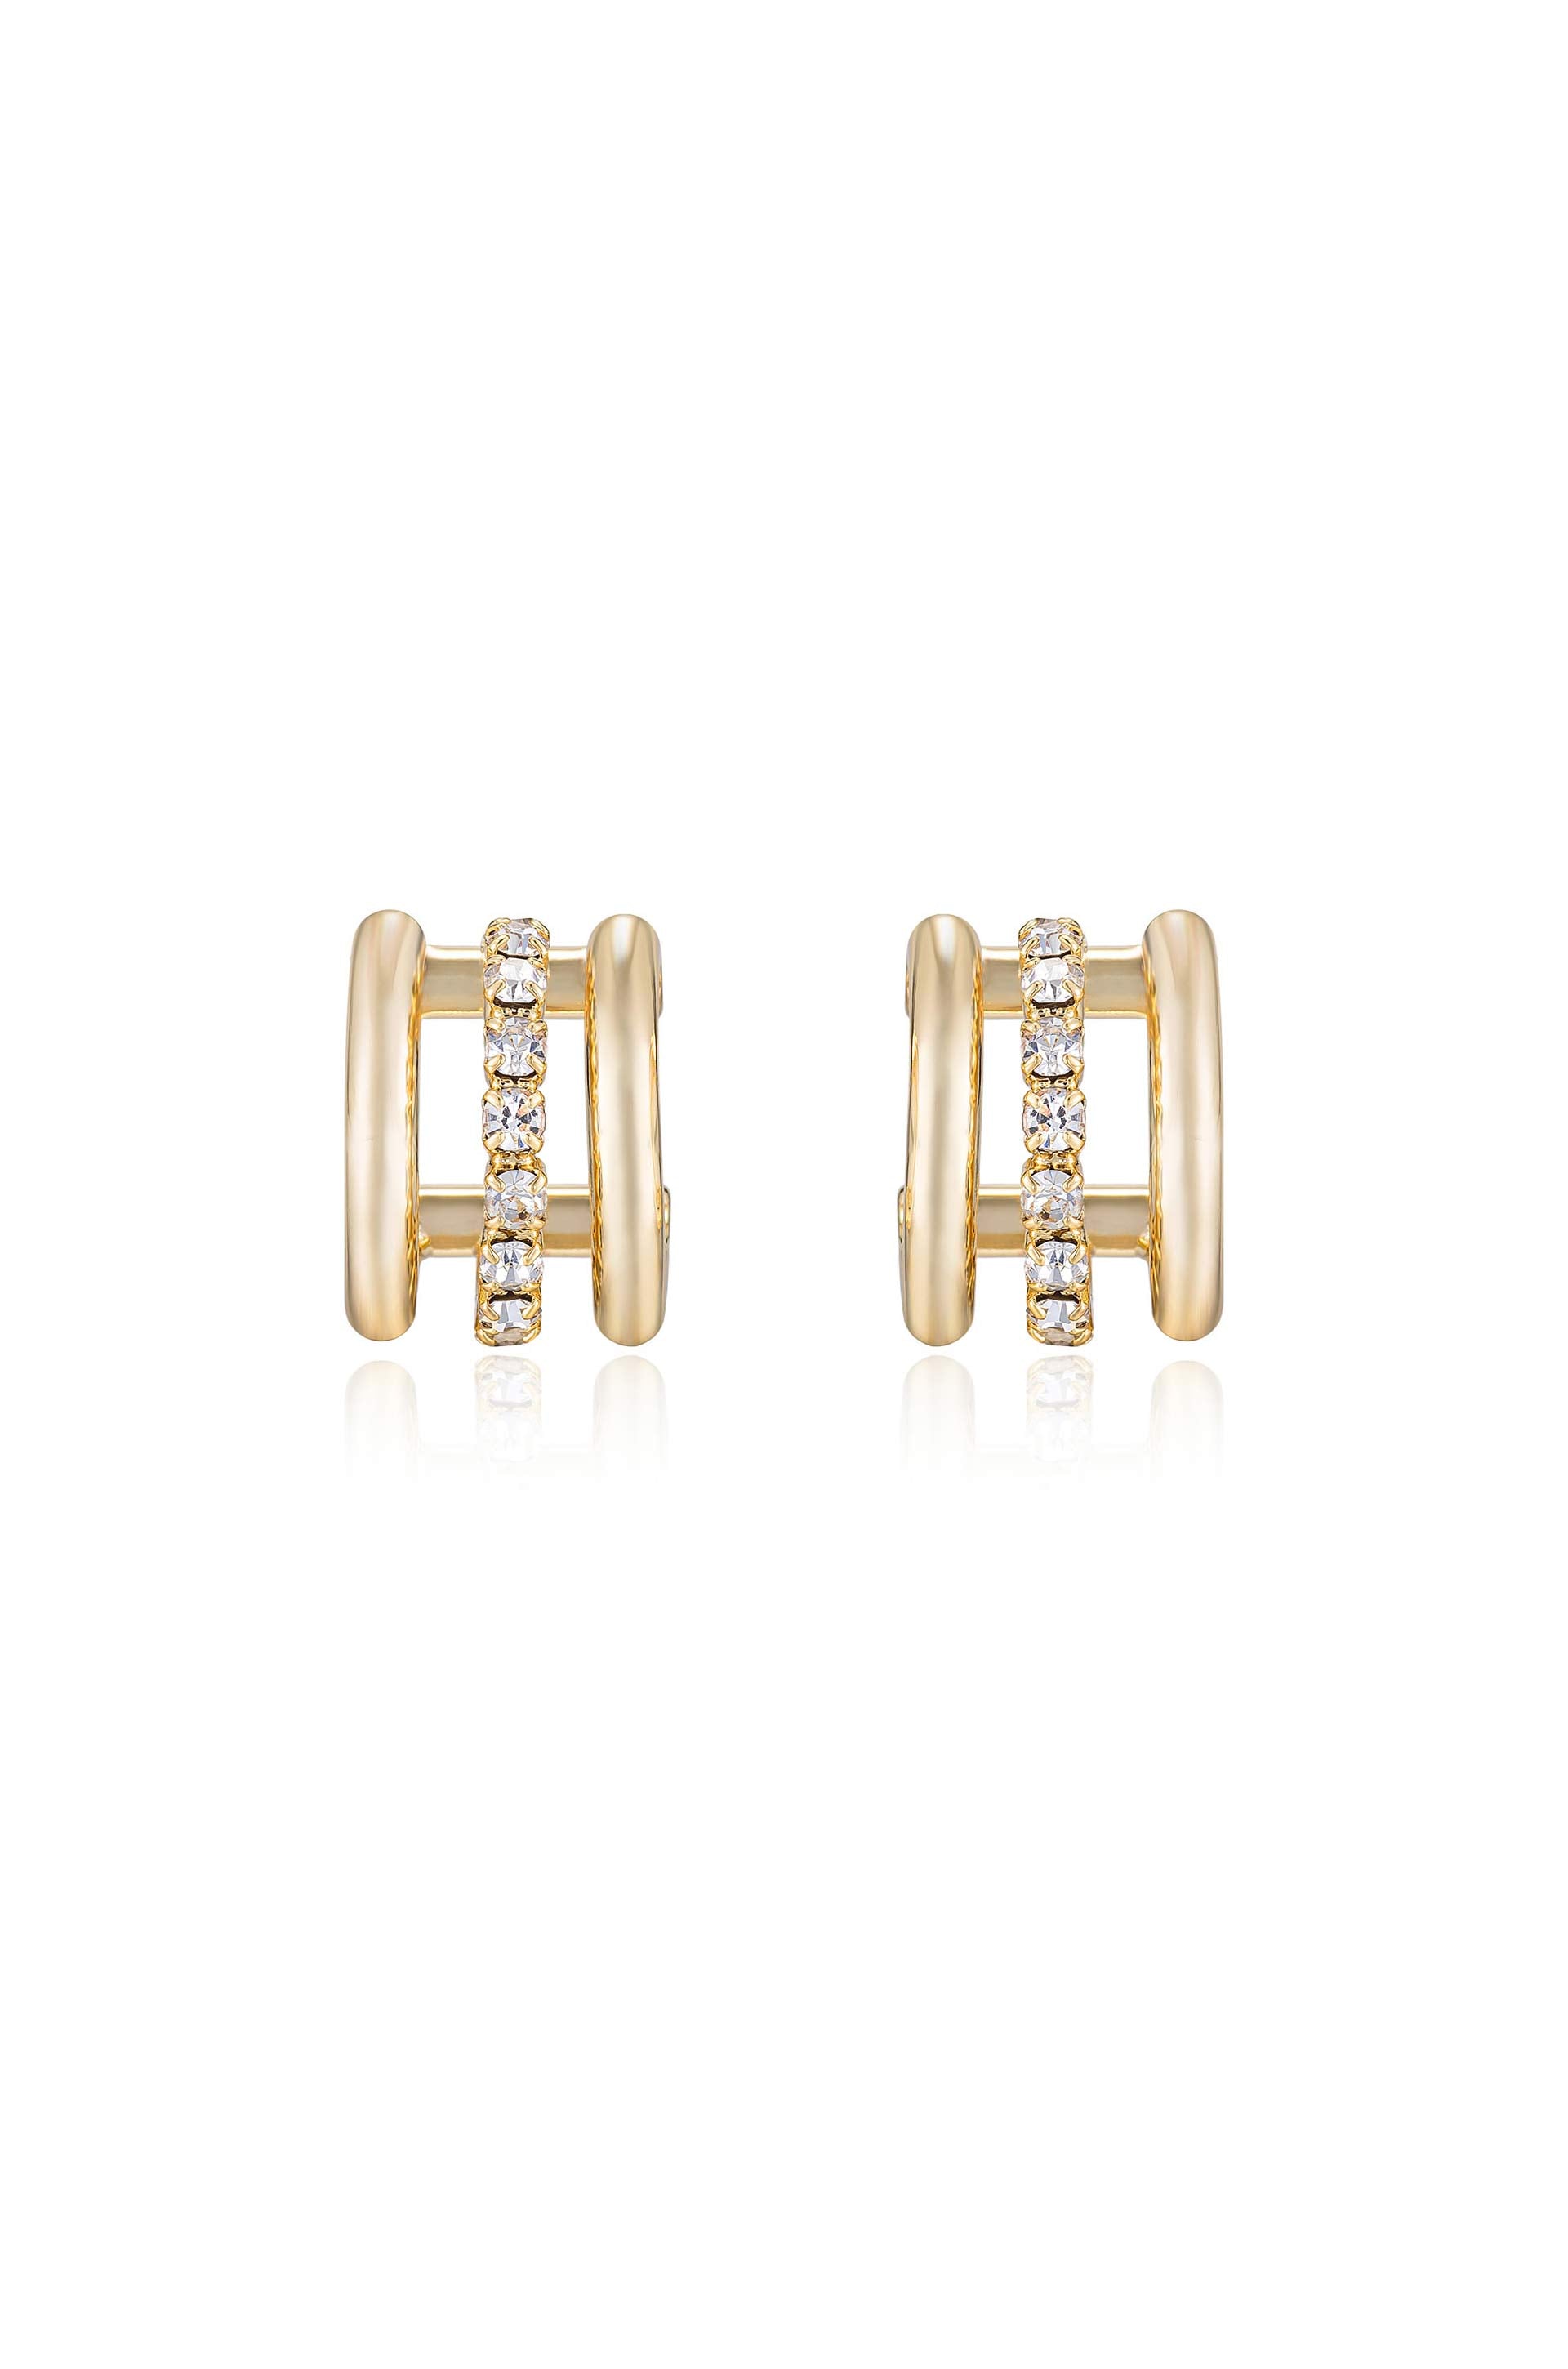 L to V Earrings S00 - Fashion Jewelry